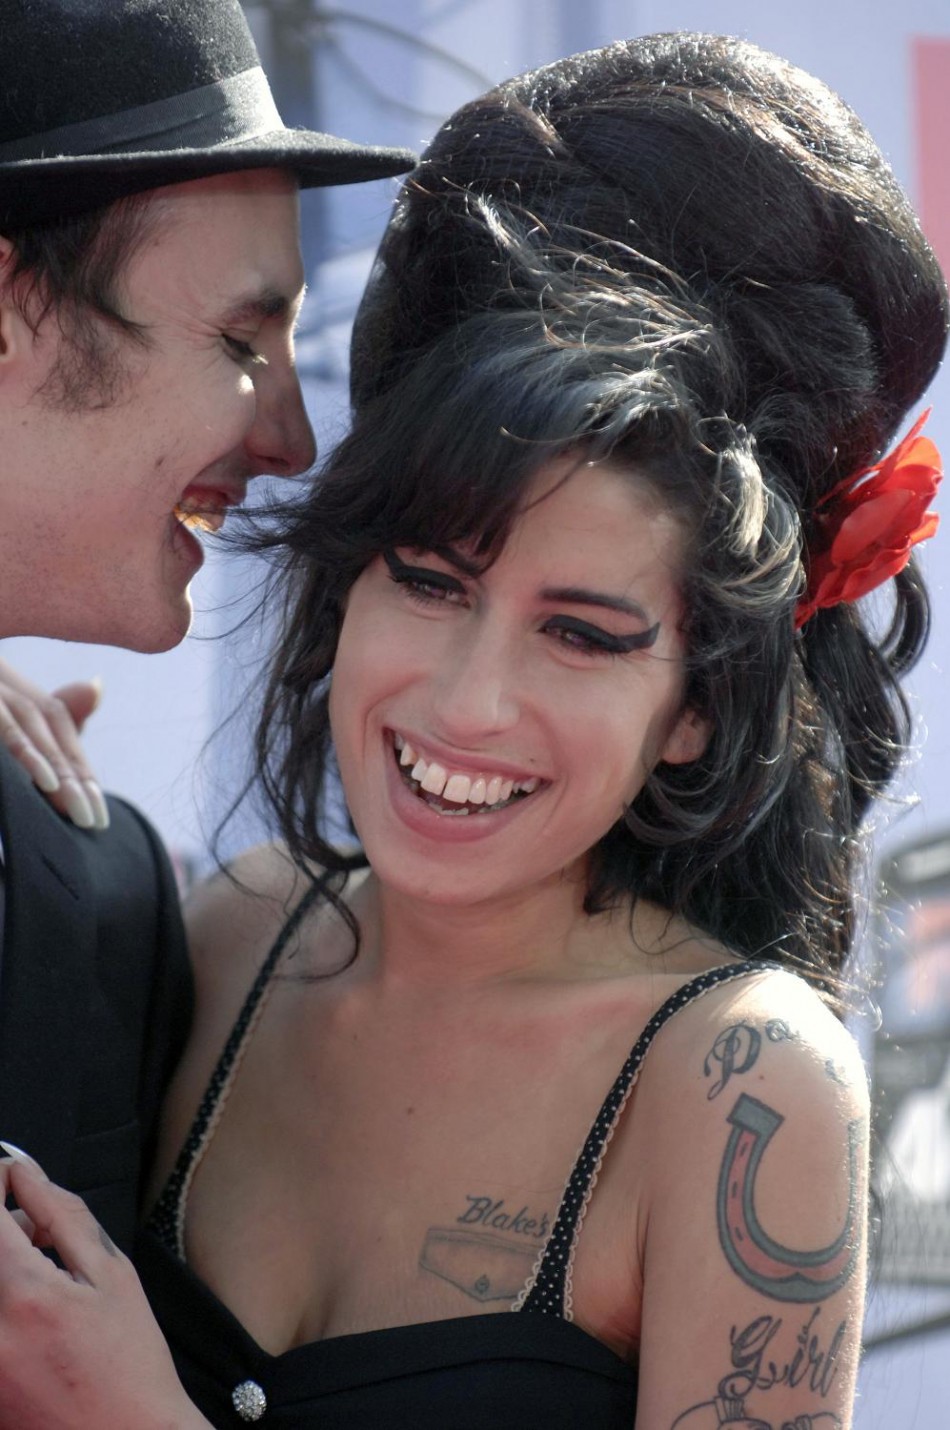 Singer Amy Winehouse and husband Blake Fielder-Civil attend the 2007 MTV Movie Awards in Los Angeles, California.